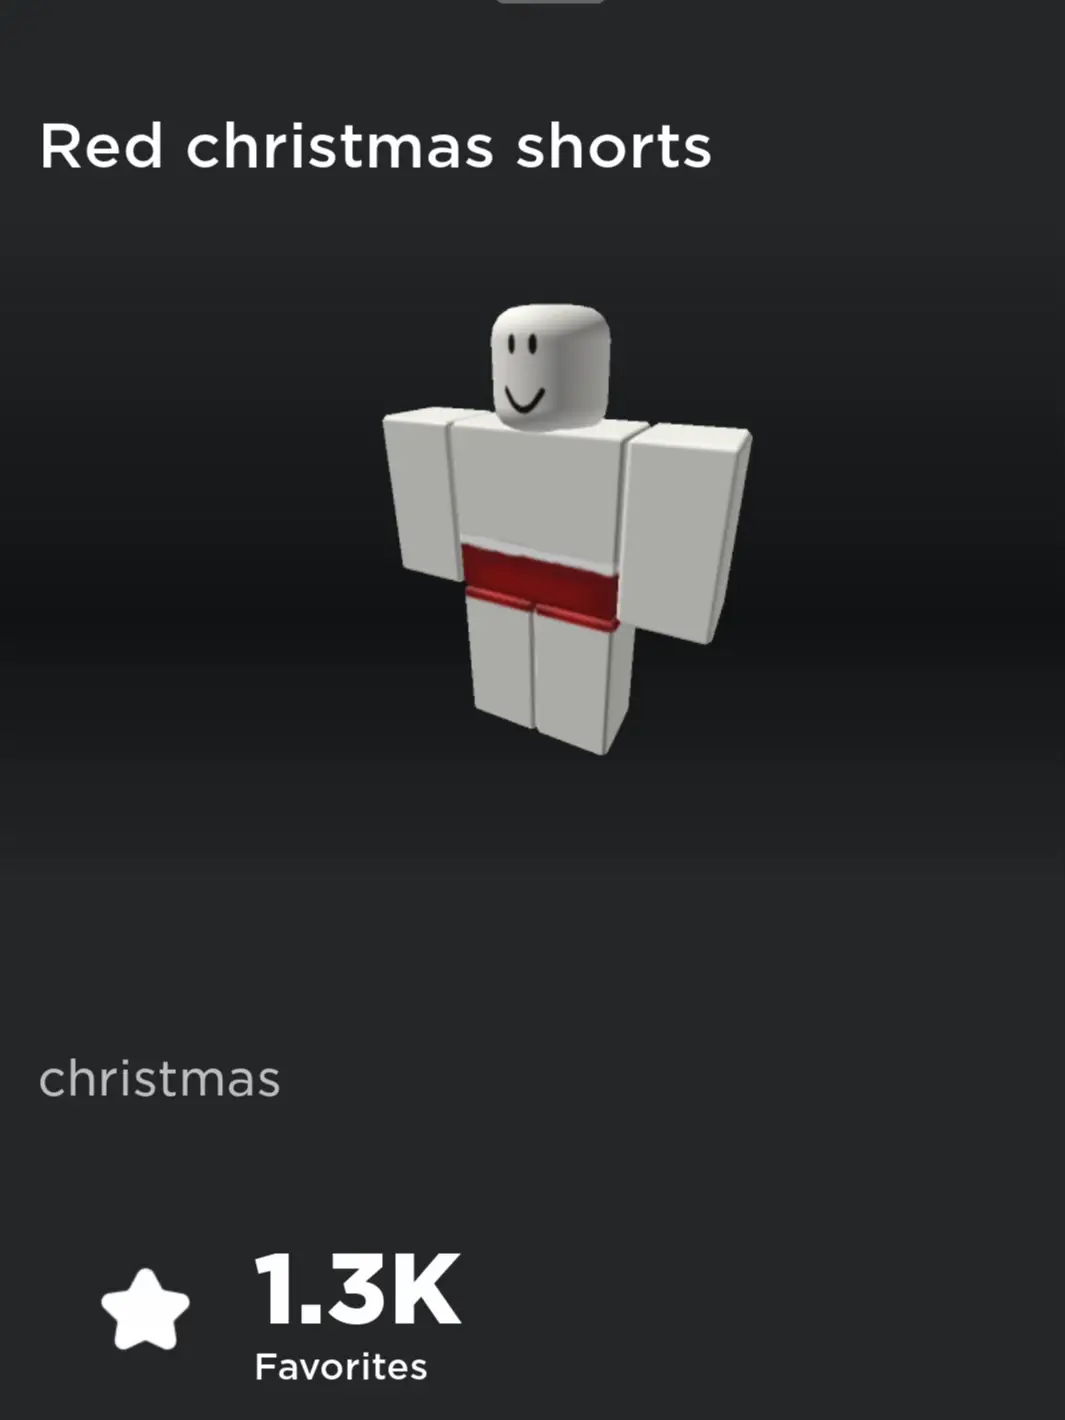 Cute Christmas Roblox Avatar Ideas!🎄, Gallery posted by Prettylilsun